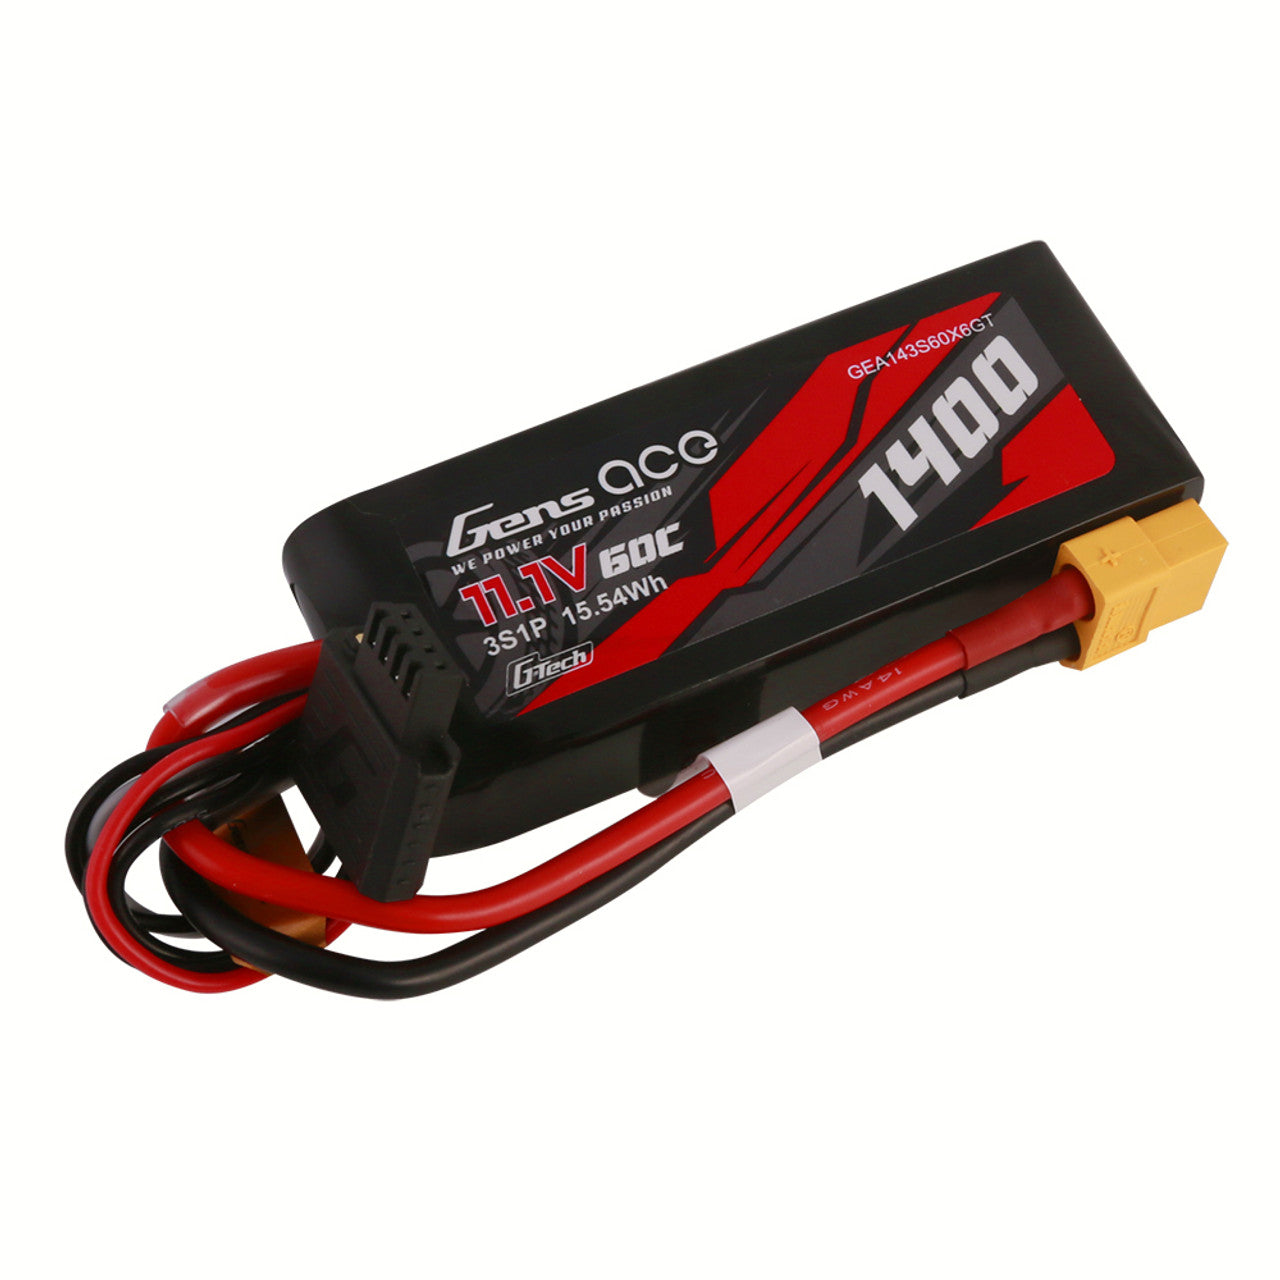 GEA143S60X6GT Gens Ace 1400mAh 11.1V 60C 3S1P G-Tech Lipo Battery Pack With XT60 Plug